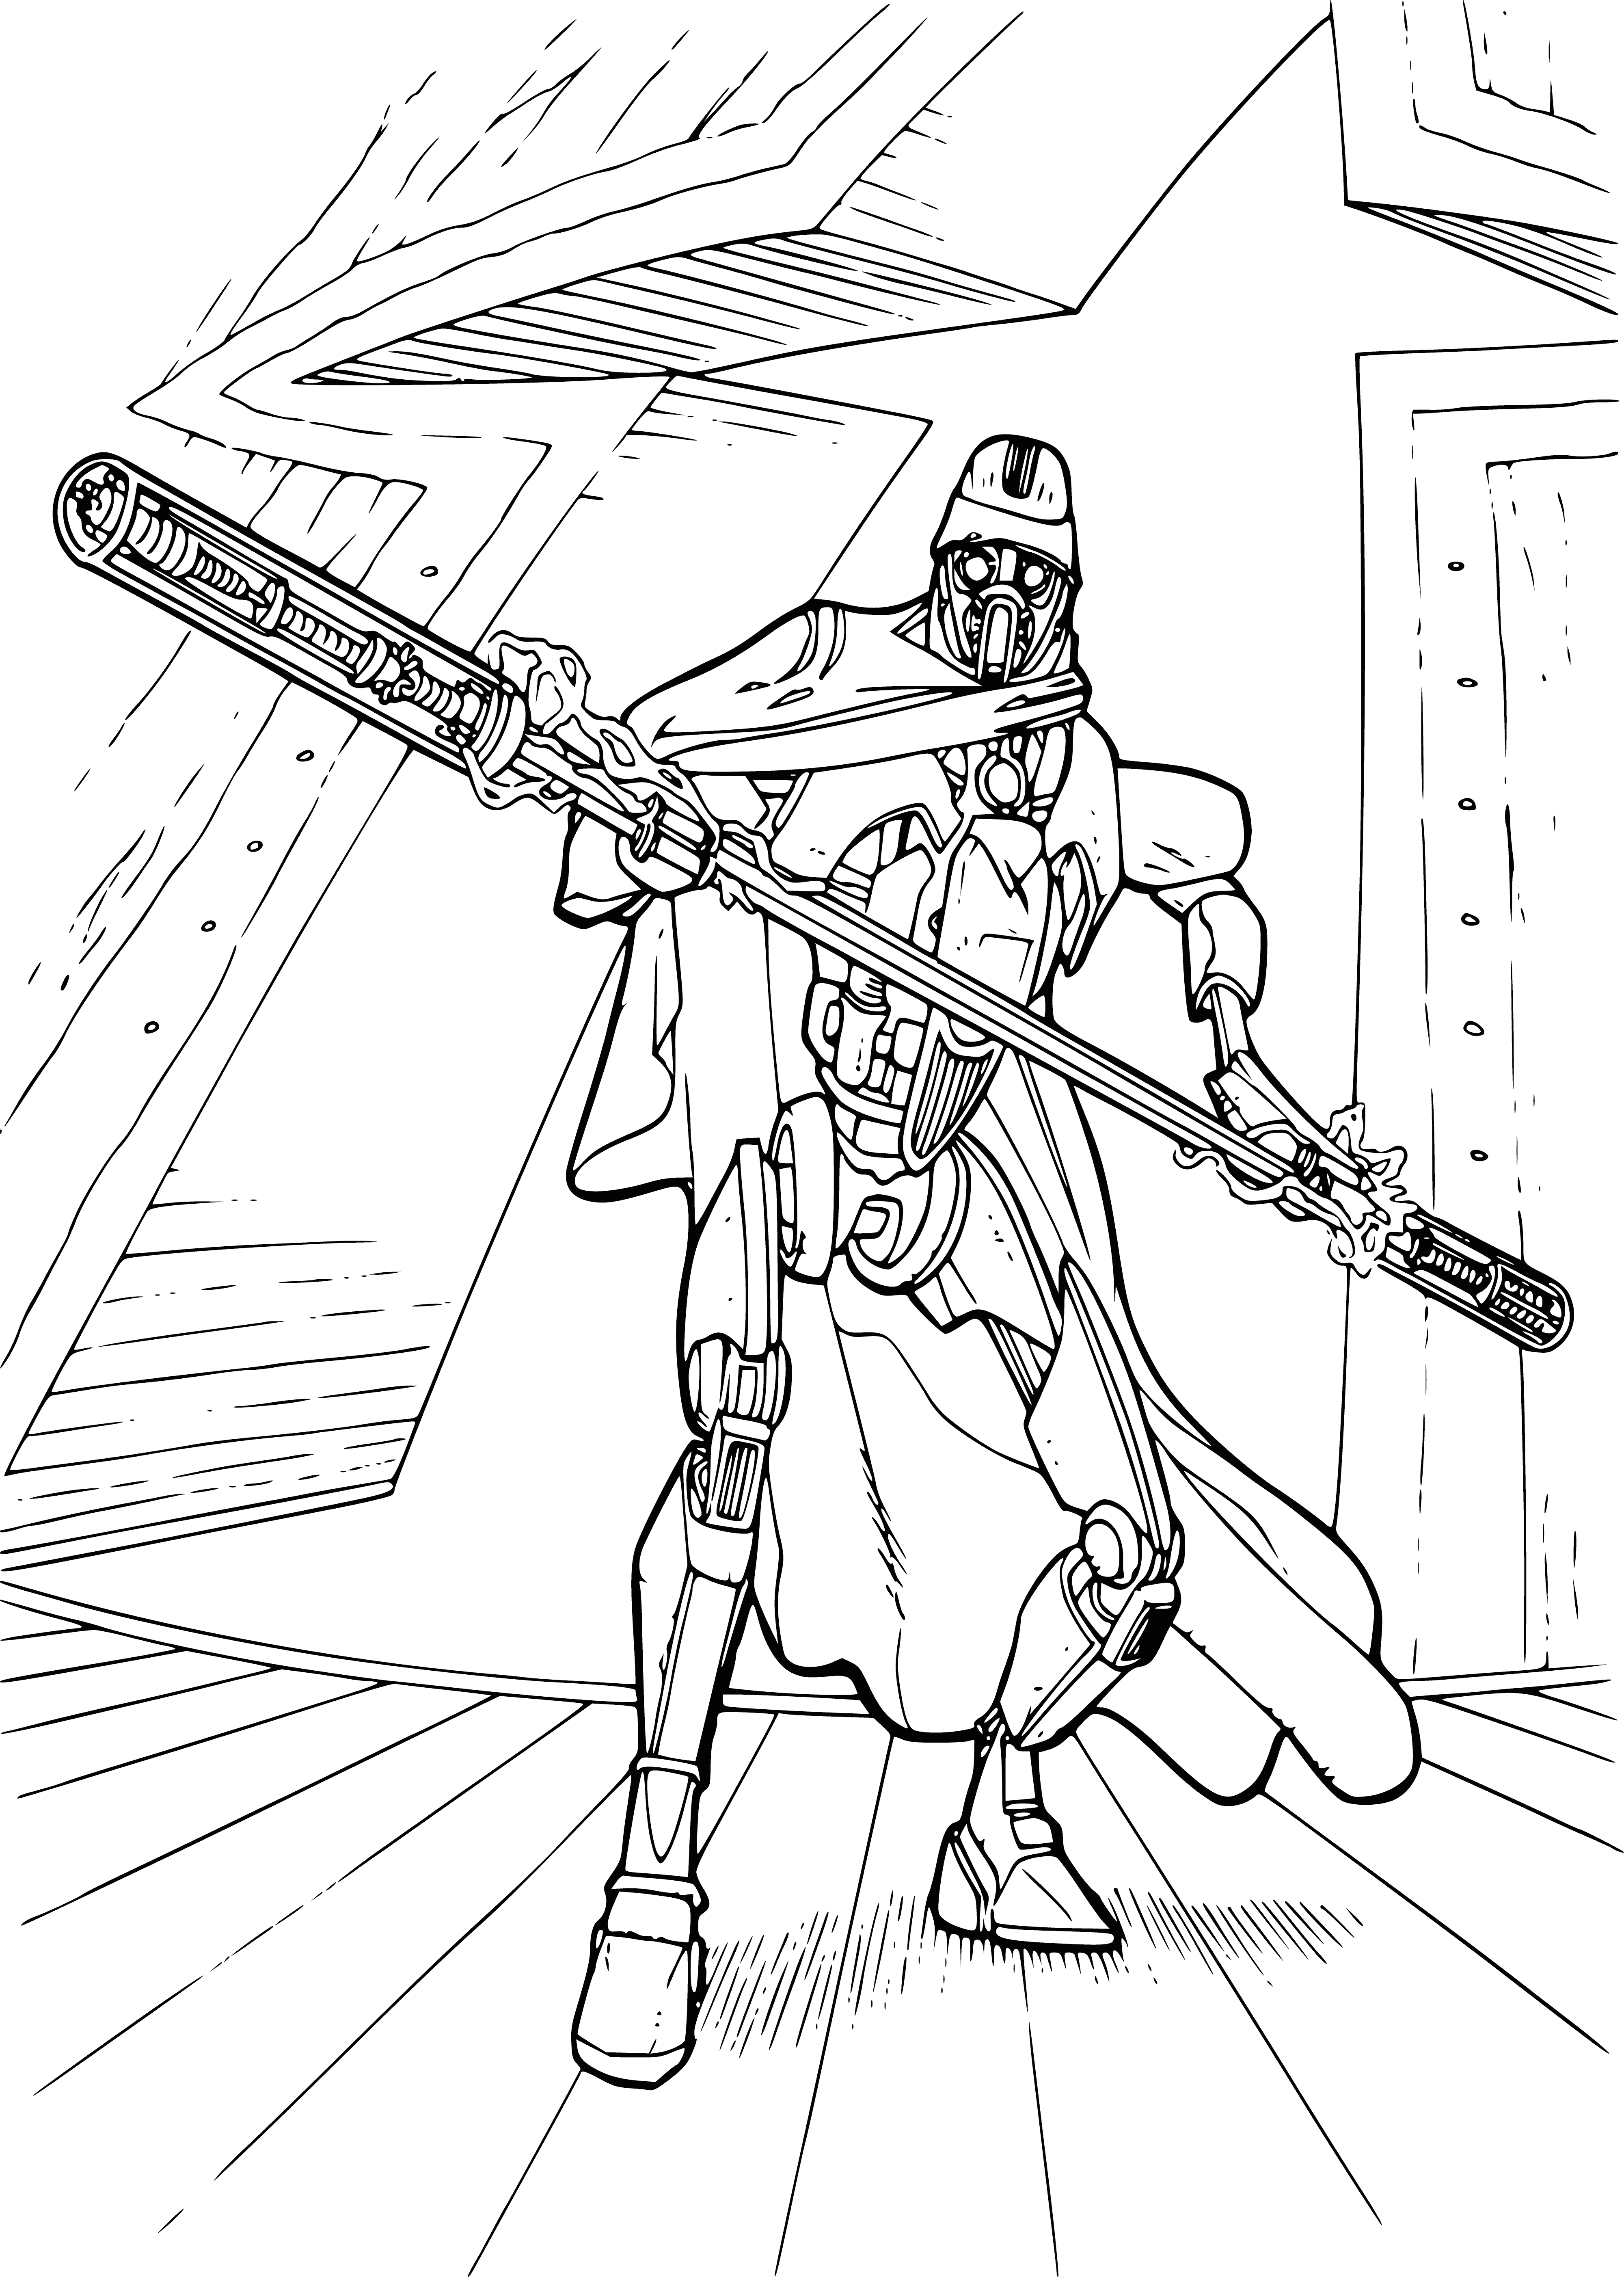 coloring page: A droid MagnaGuard stands on a grassy platform holding a staff in its right hand & raising its left. Its red cylindrical head has a black visor for eyes. #StarWars #ColoringPage